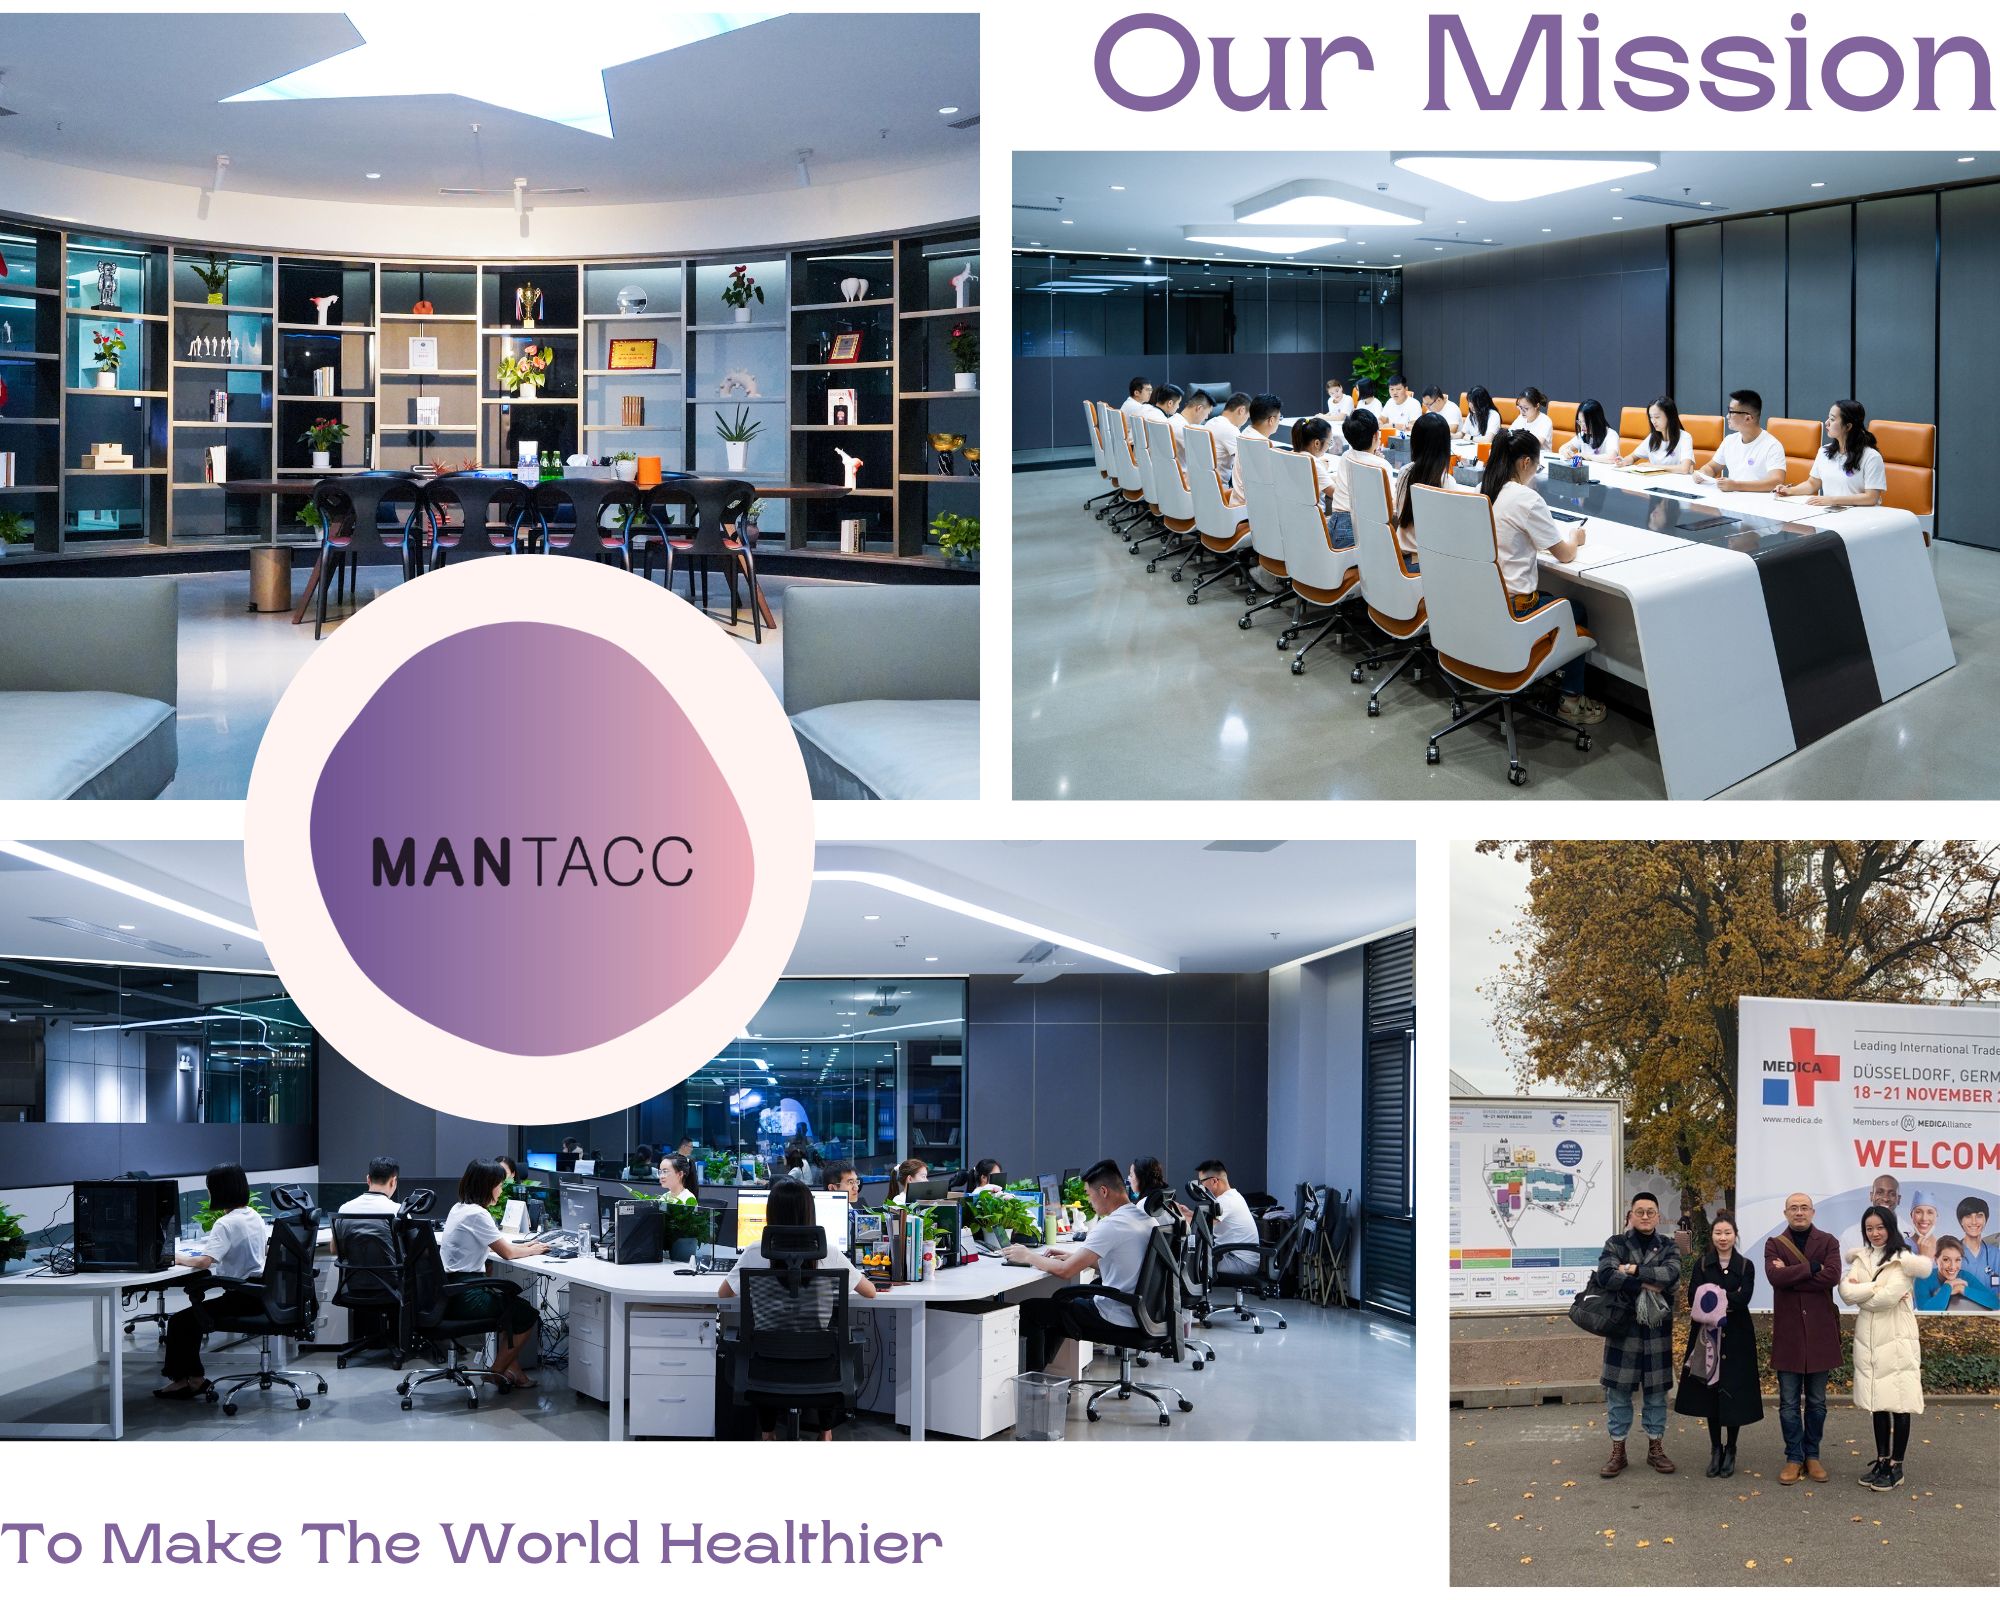 Mantacc mission is 'To Make The World Healthier'.